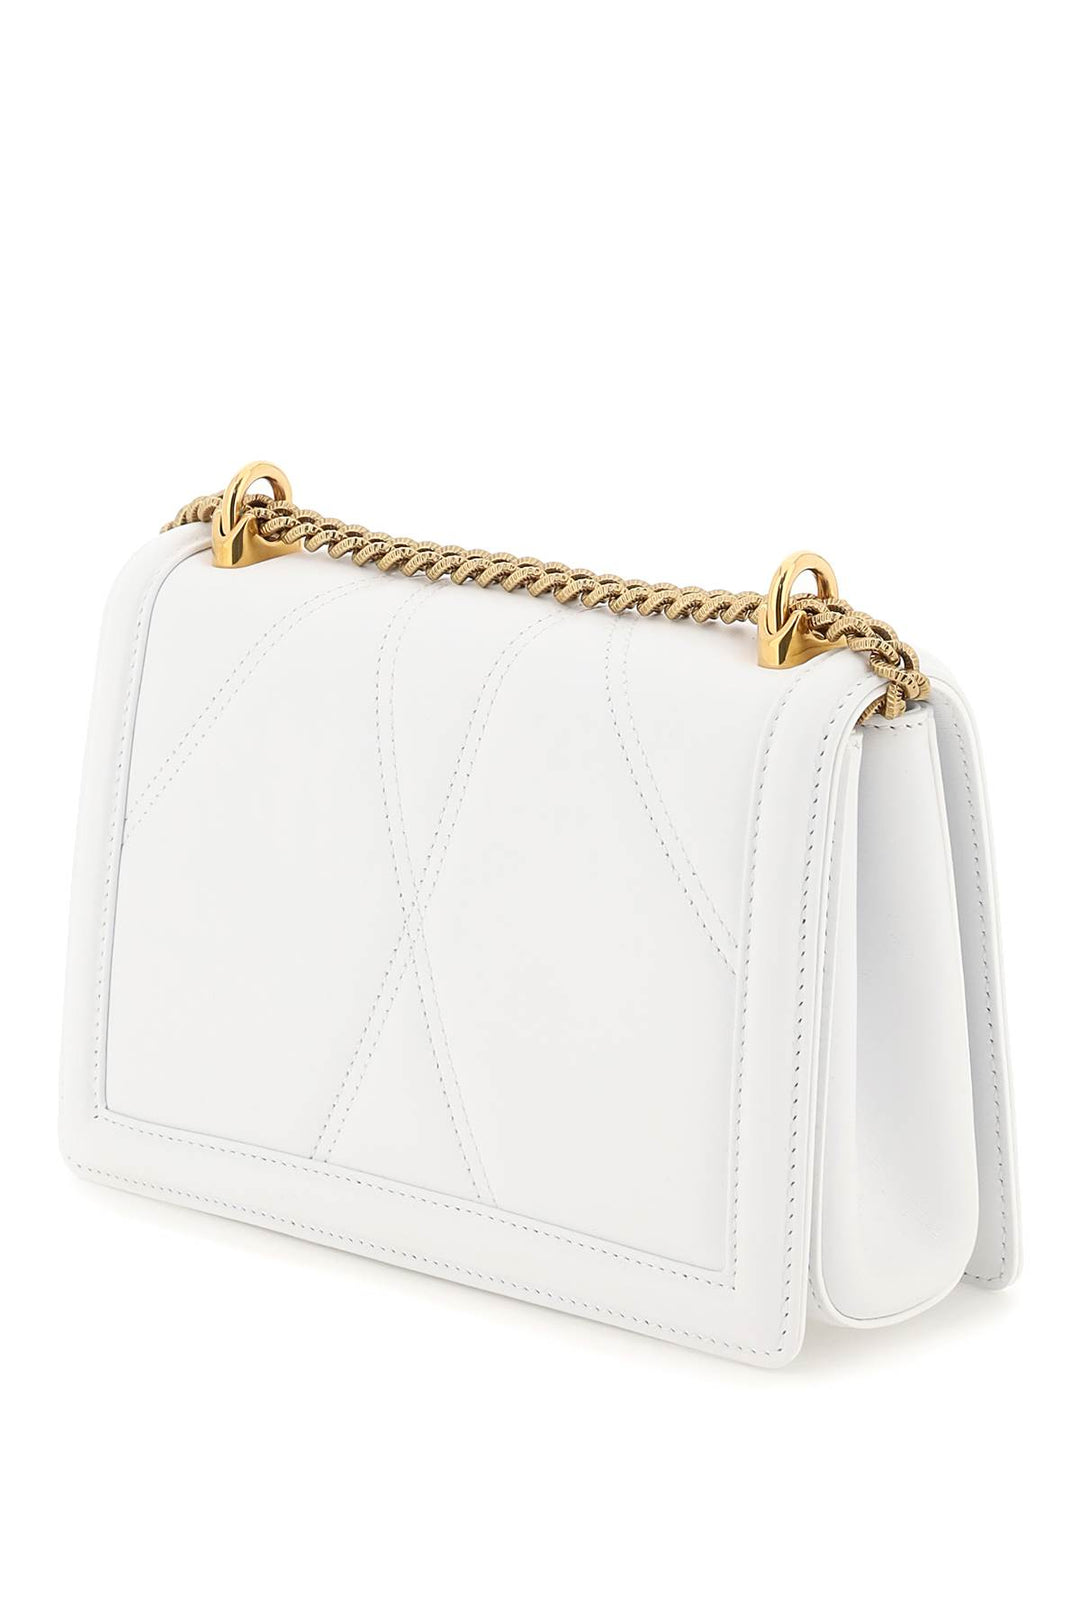 Dolce & Gabbana Medium 'Devotion' Bag In Quilted Nappa Leather   White